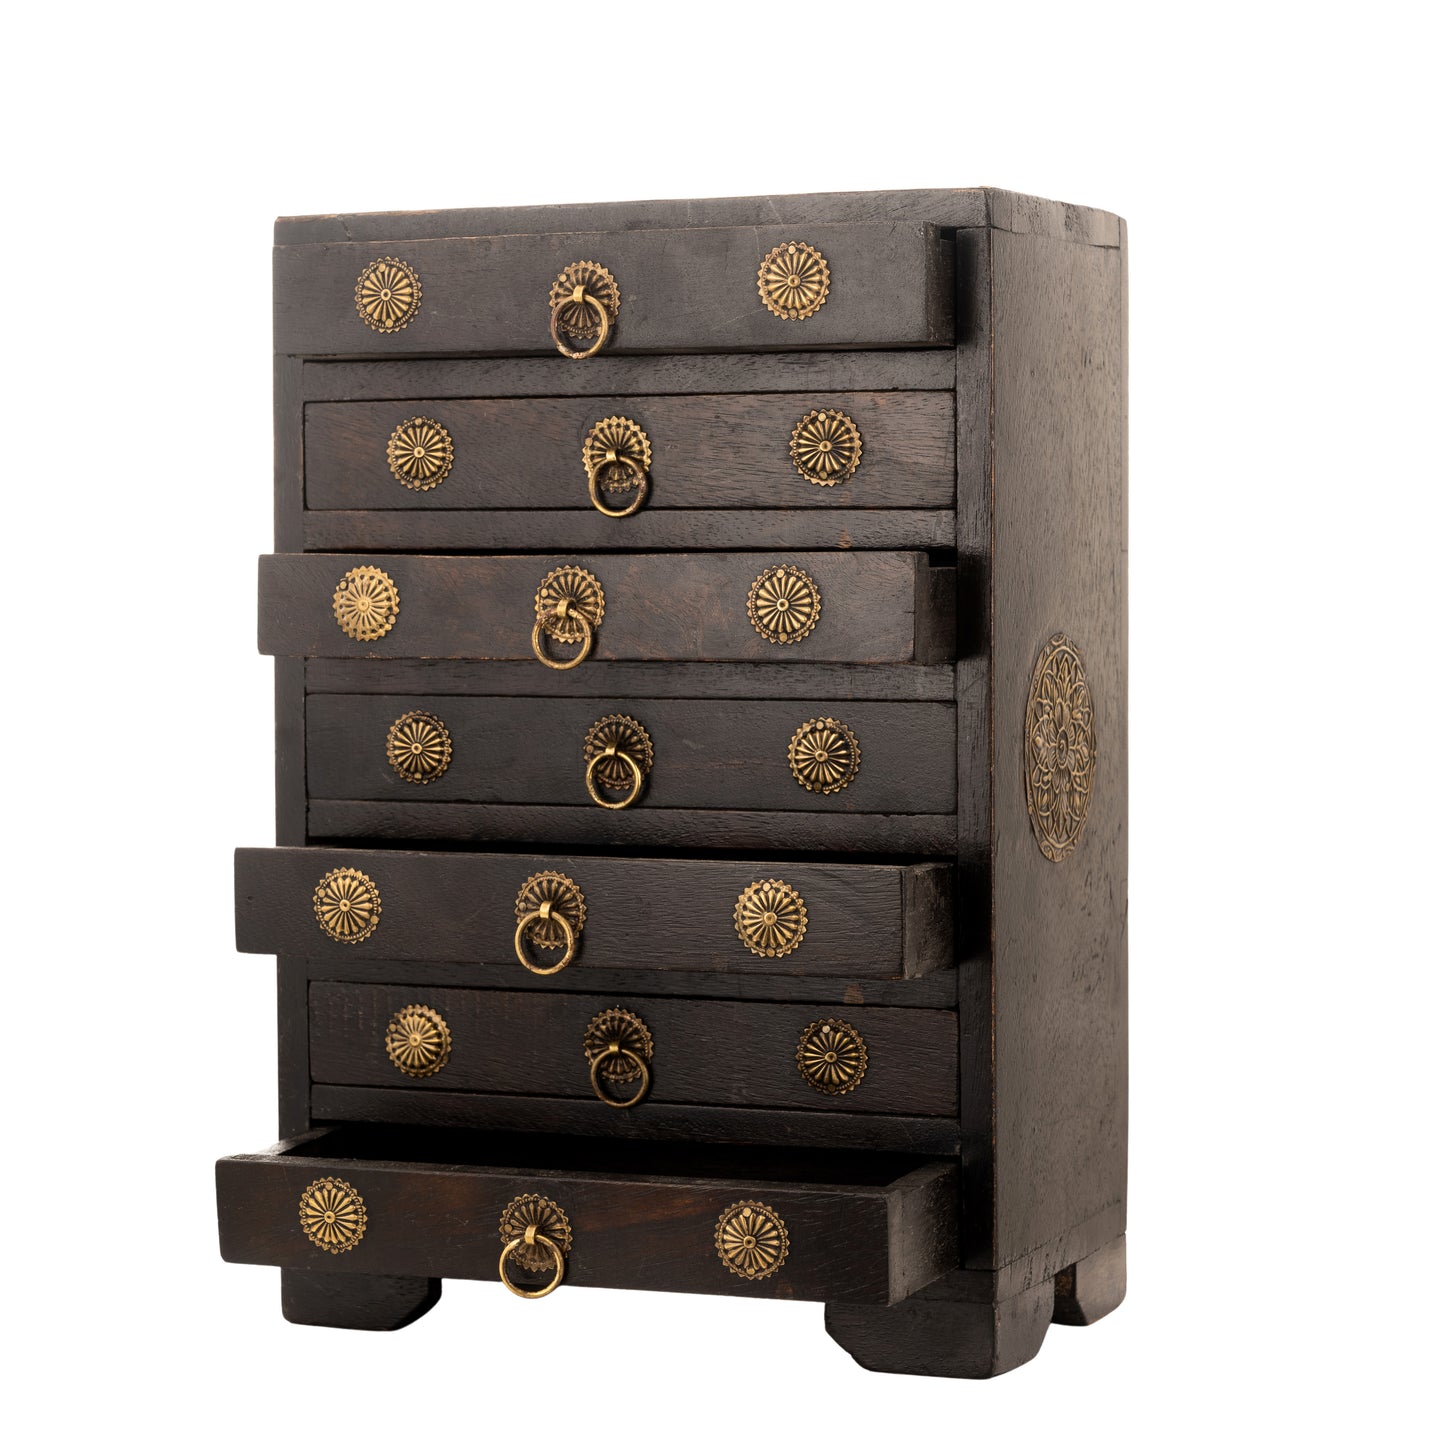 Handcrafted Antique Finish Chest of Drawers